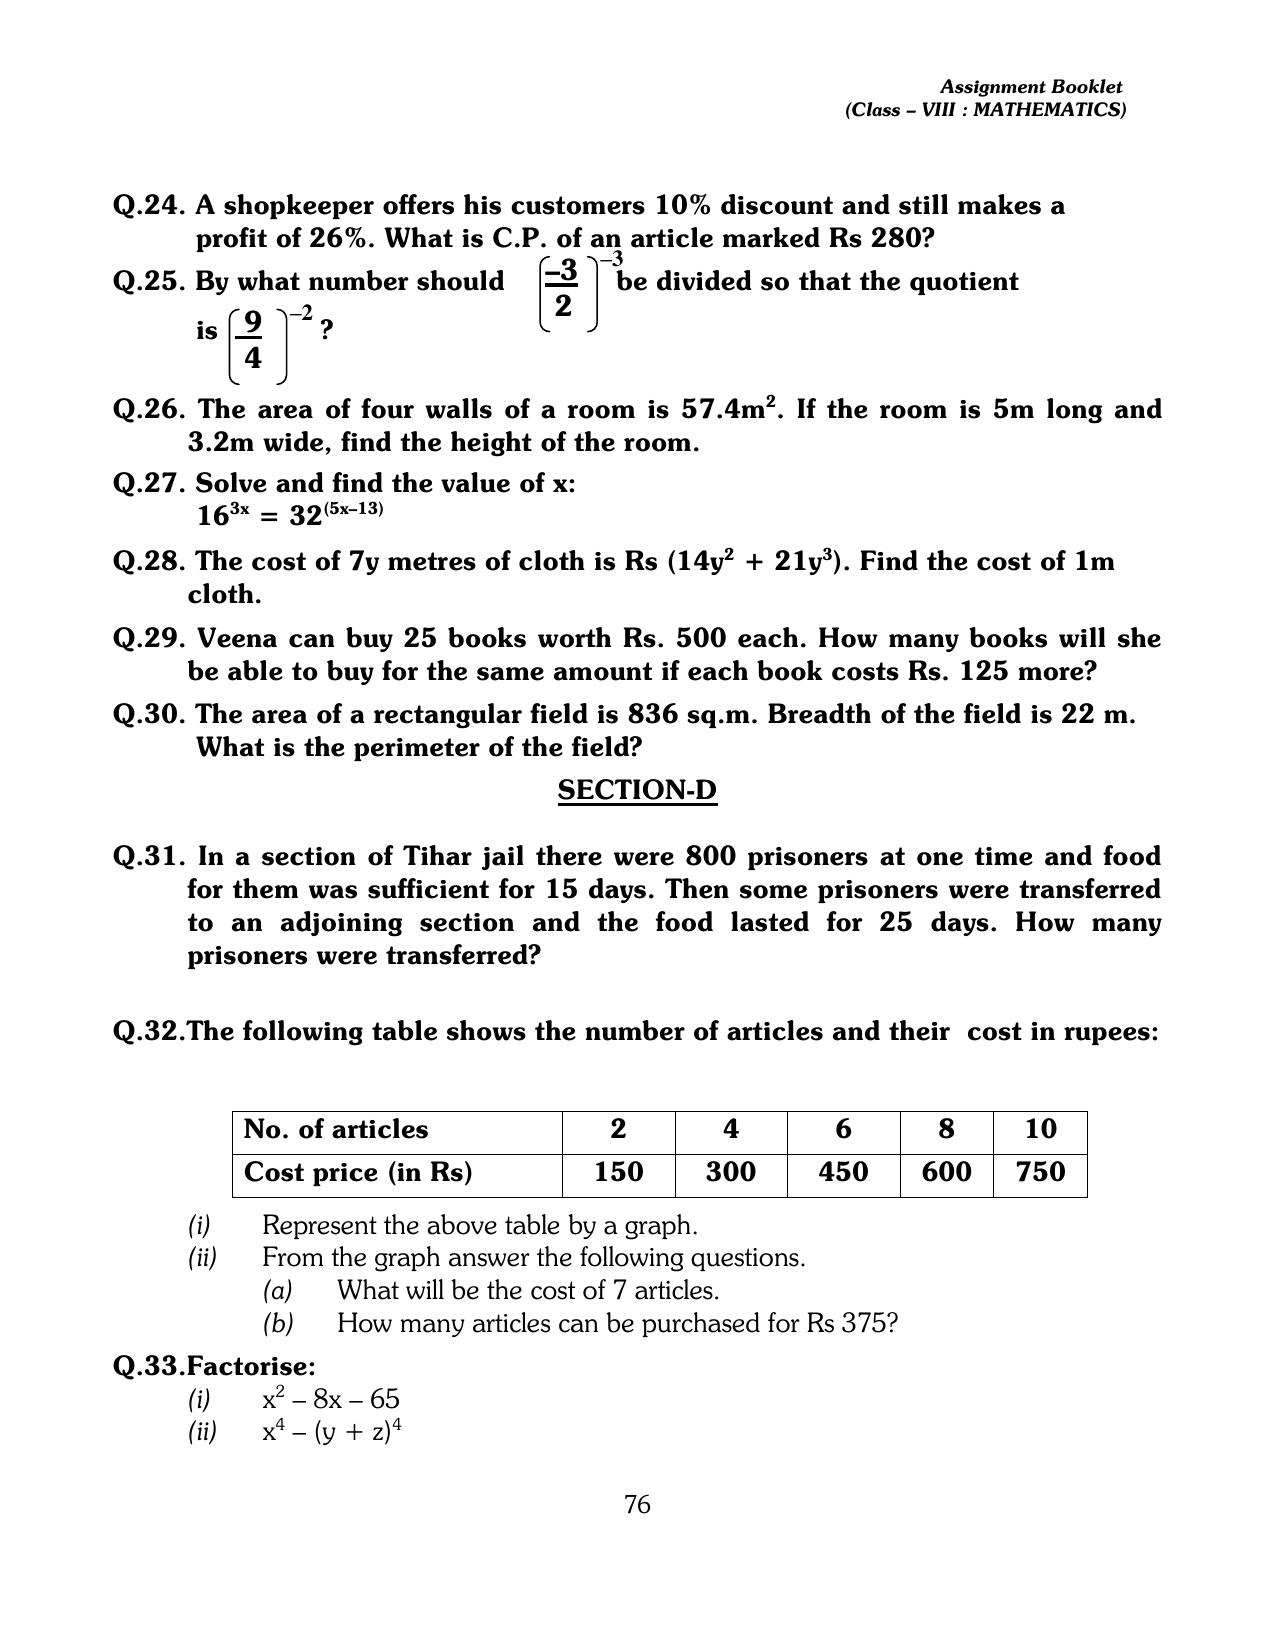 CBSE Worksheets for Class 8 Mathematics Assignment 13 - Page 66